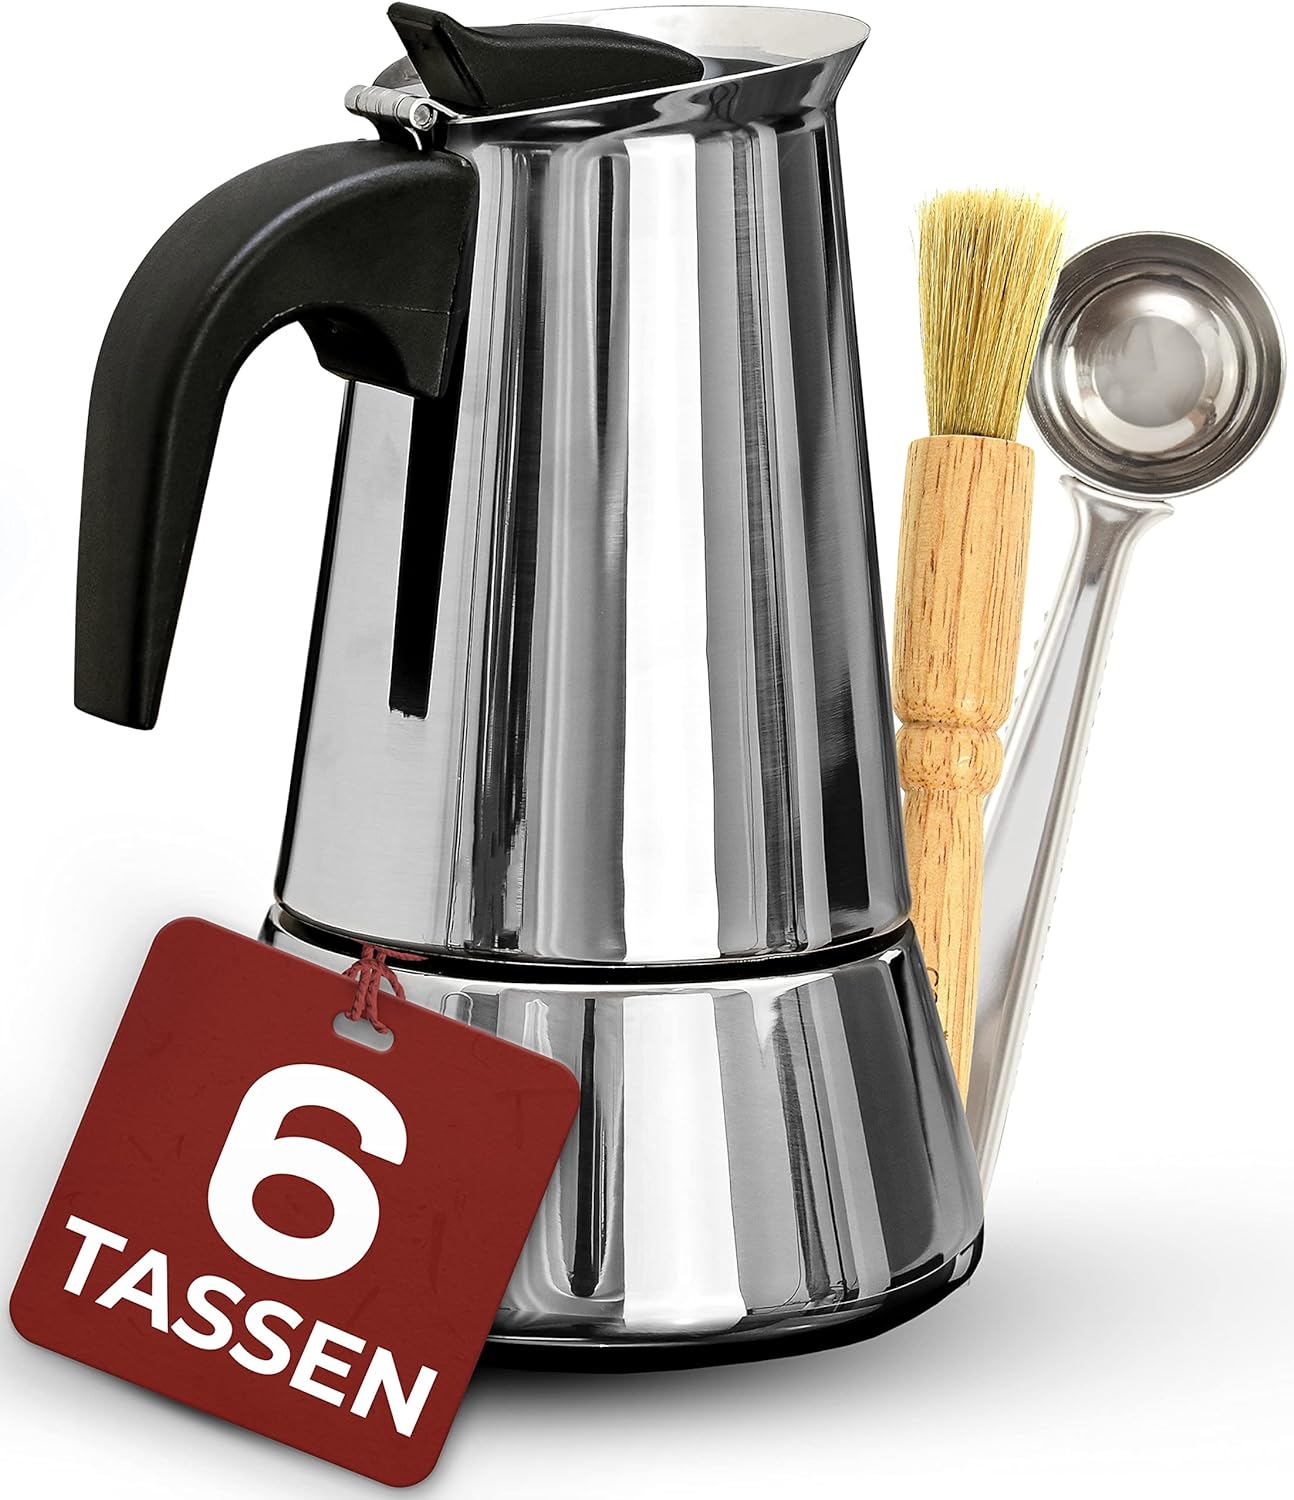 Cosumy Espresso Maker Suitable for Induction Cookers - 6 Cups - Stainless Steel - Set With Dosing Spoon and Brush - 300 ml